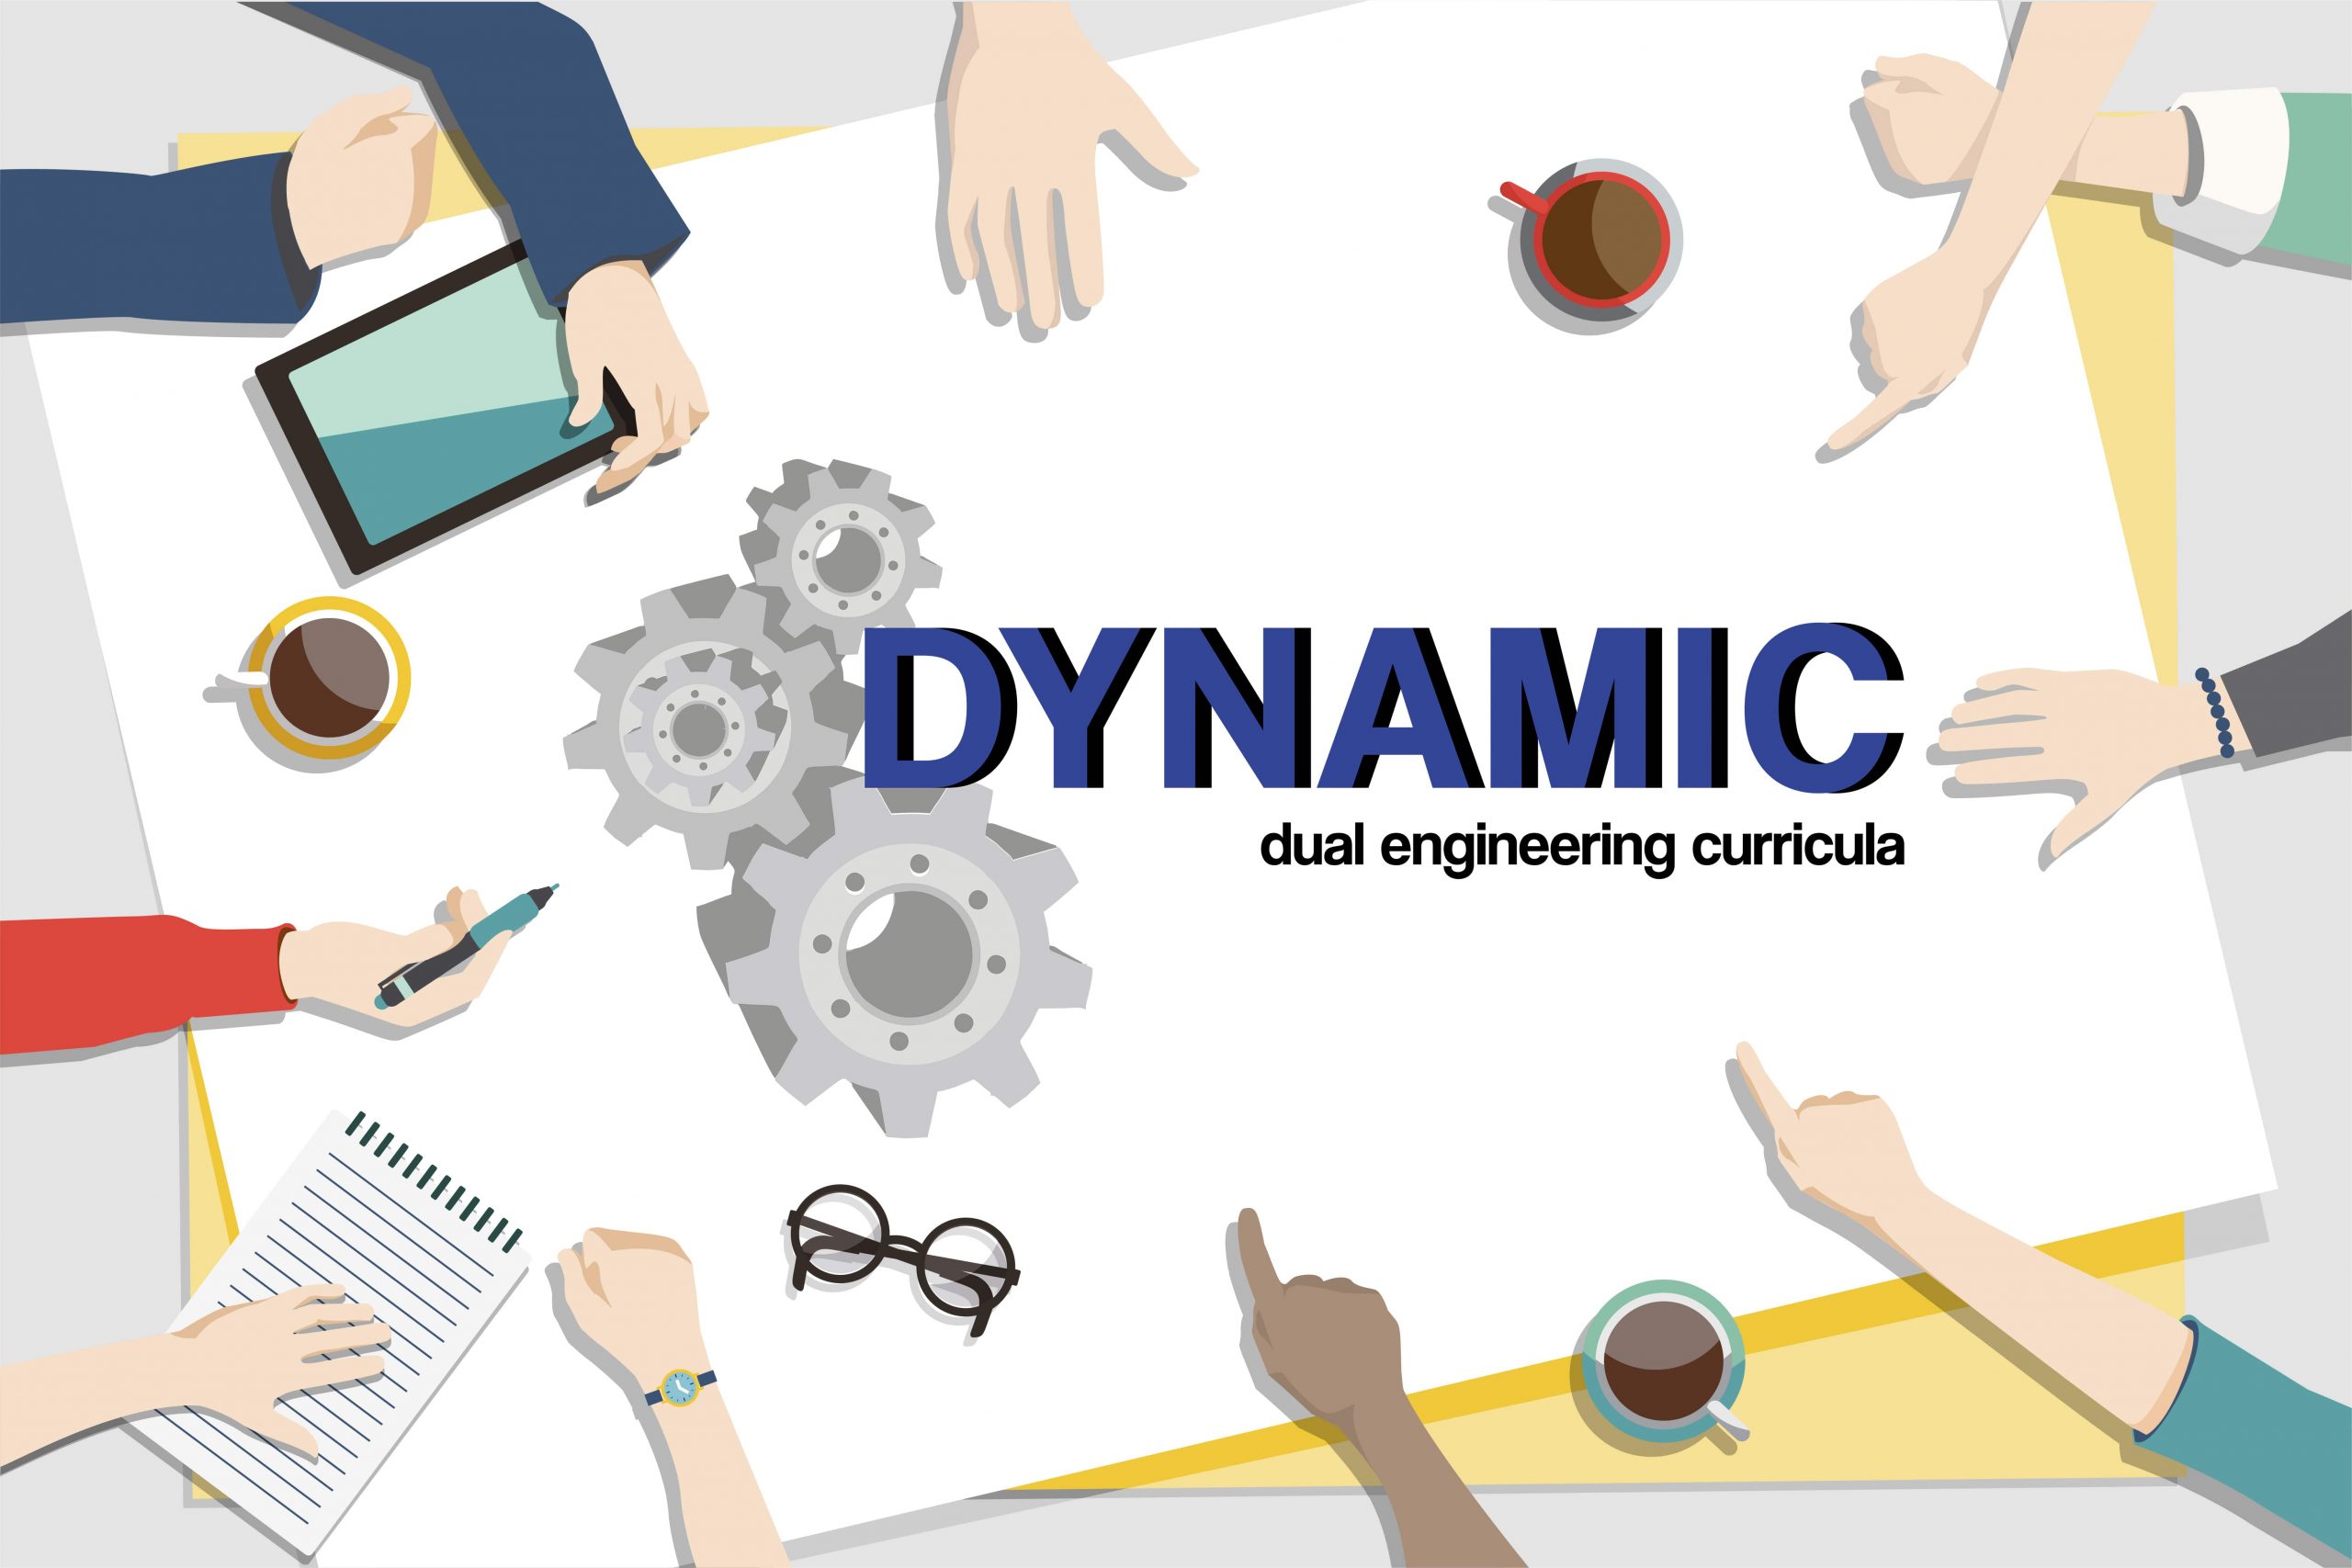 Project DYNAMIC ends